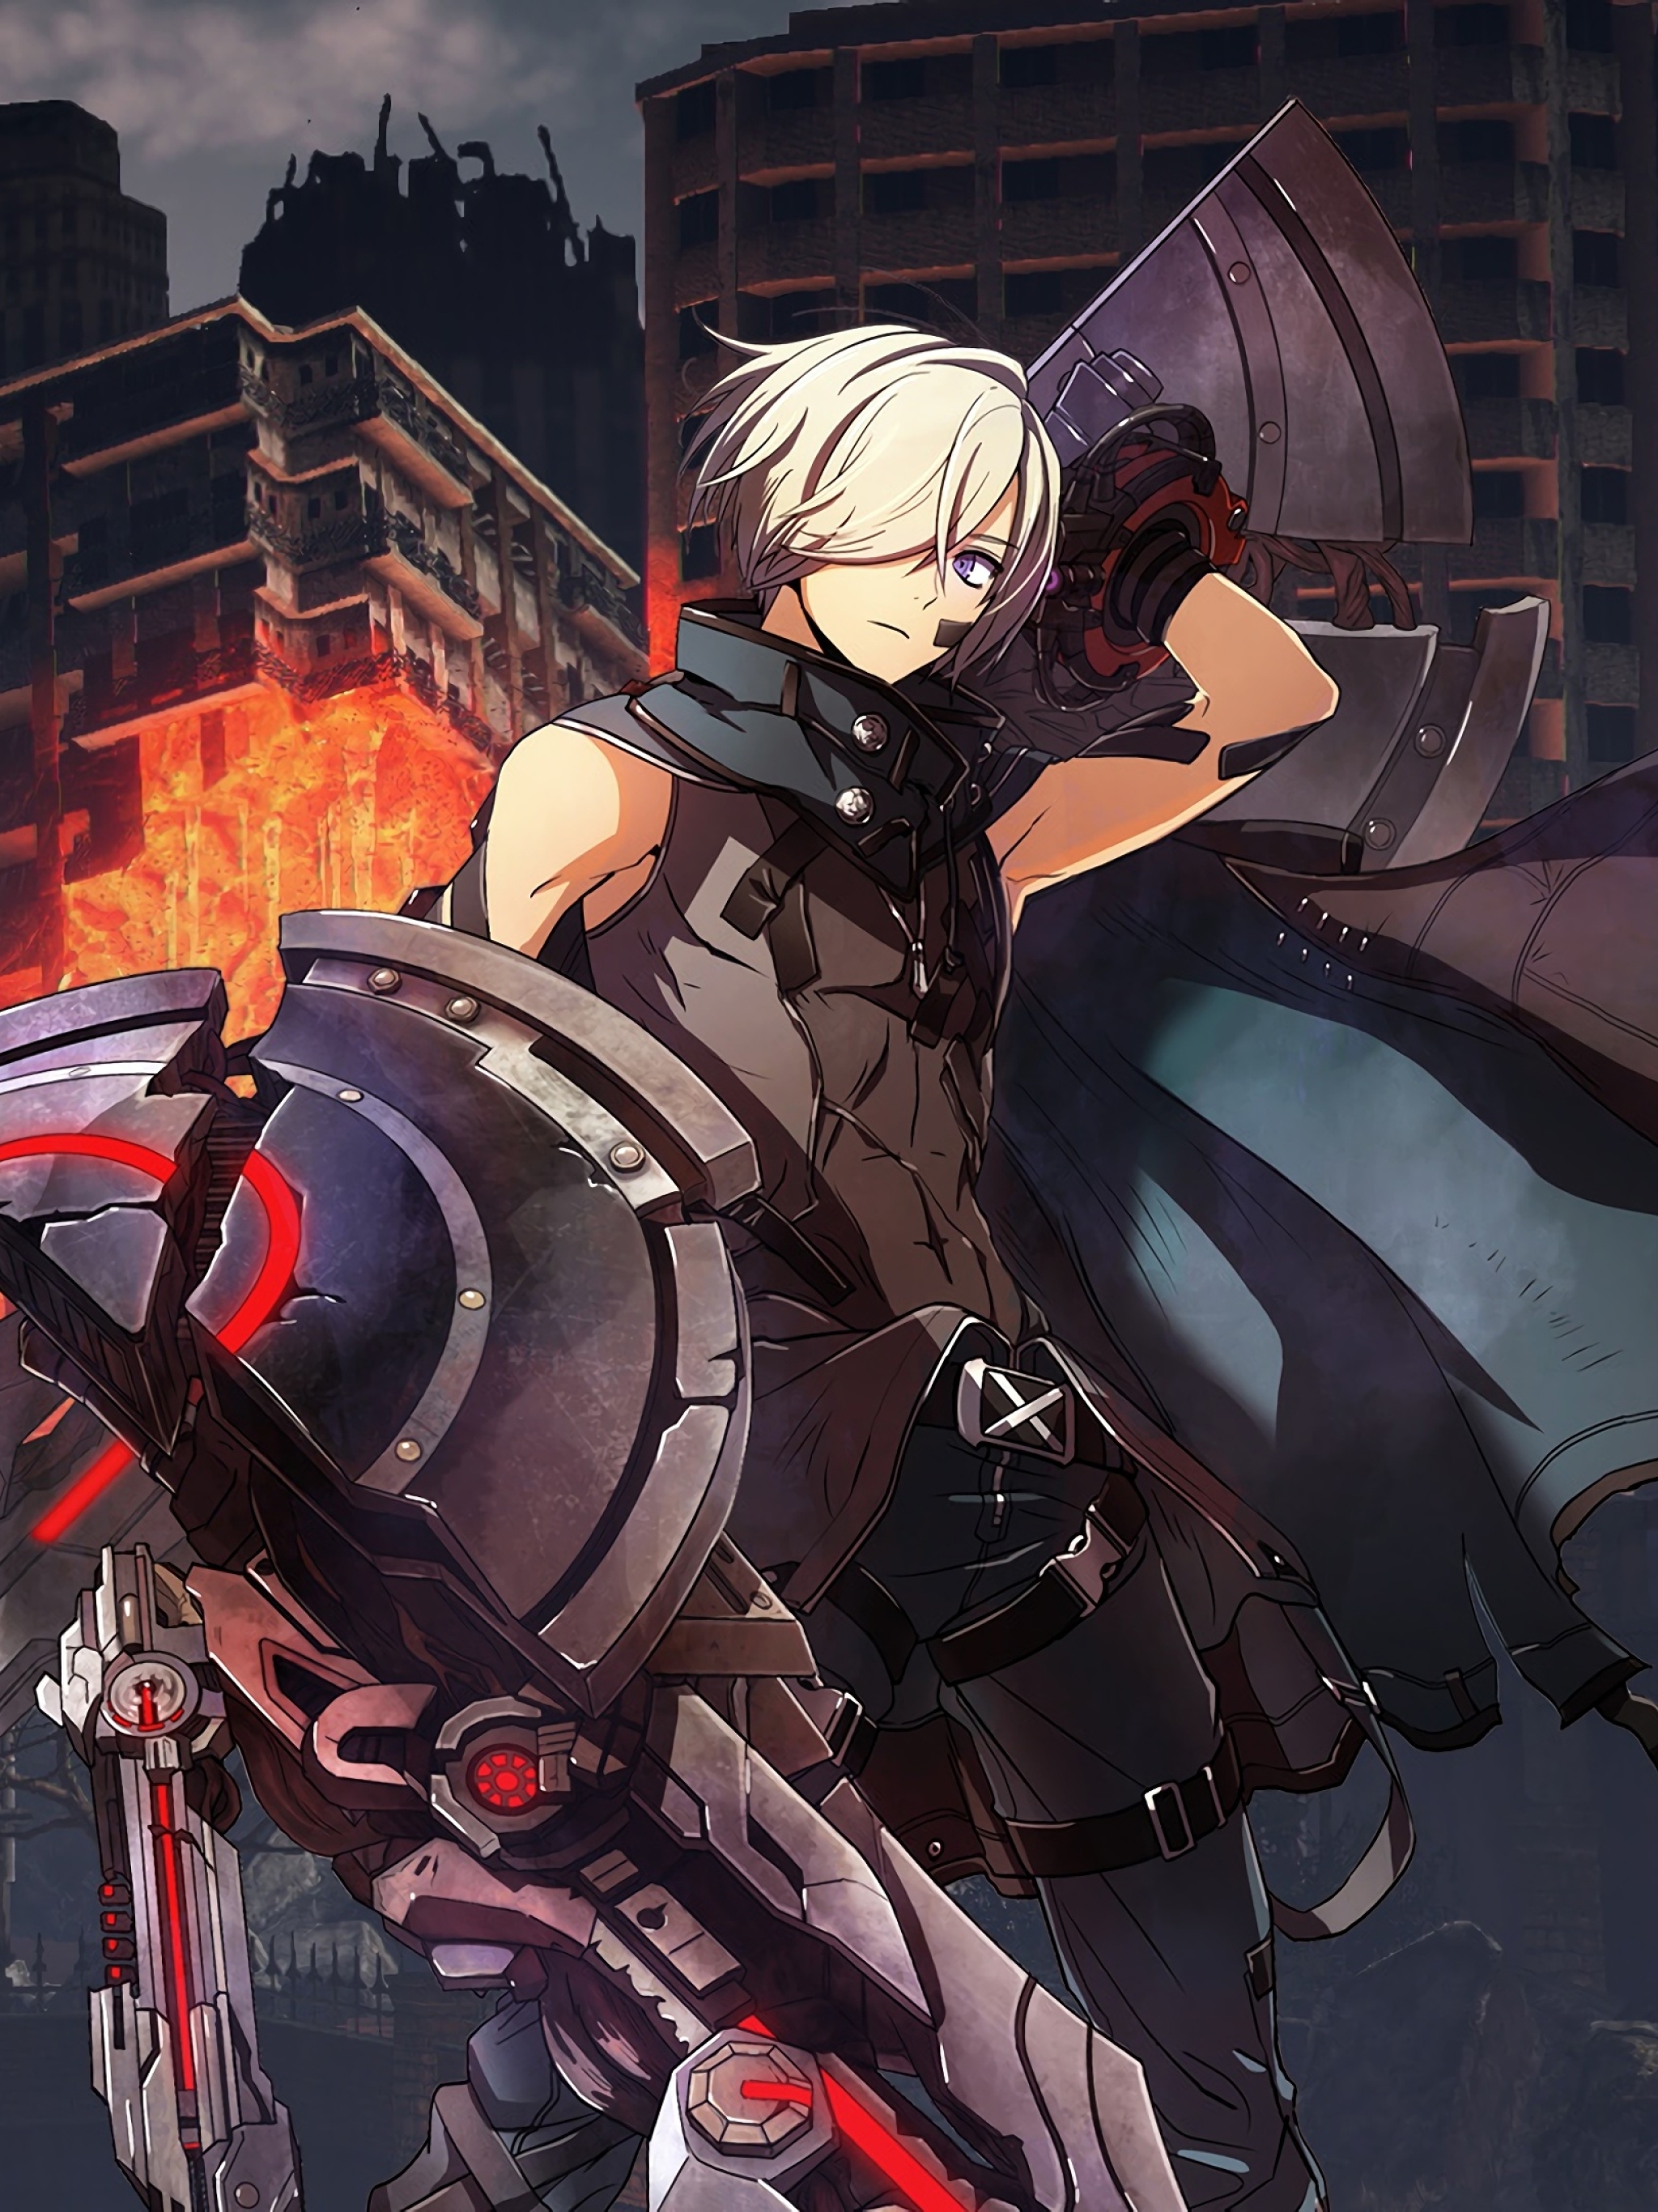 2048x2732 God Eater 3 4k 2048x2732 Resolution Wallpaper Hd Games 4k Wallpapers Images Photos And Background